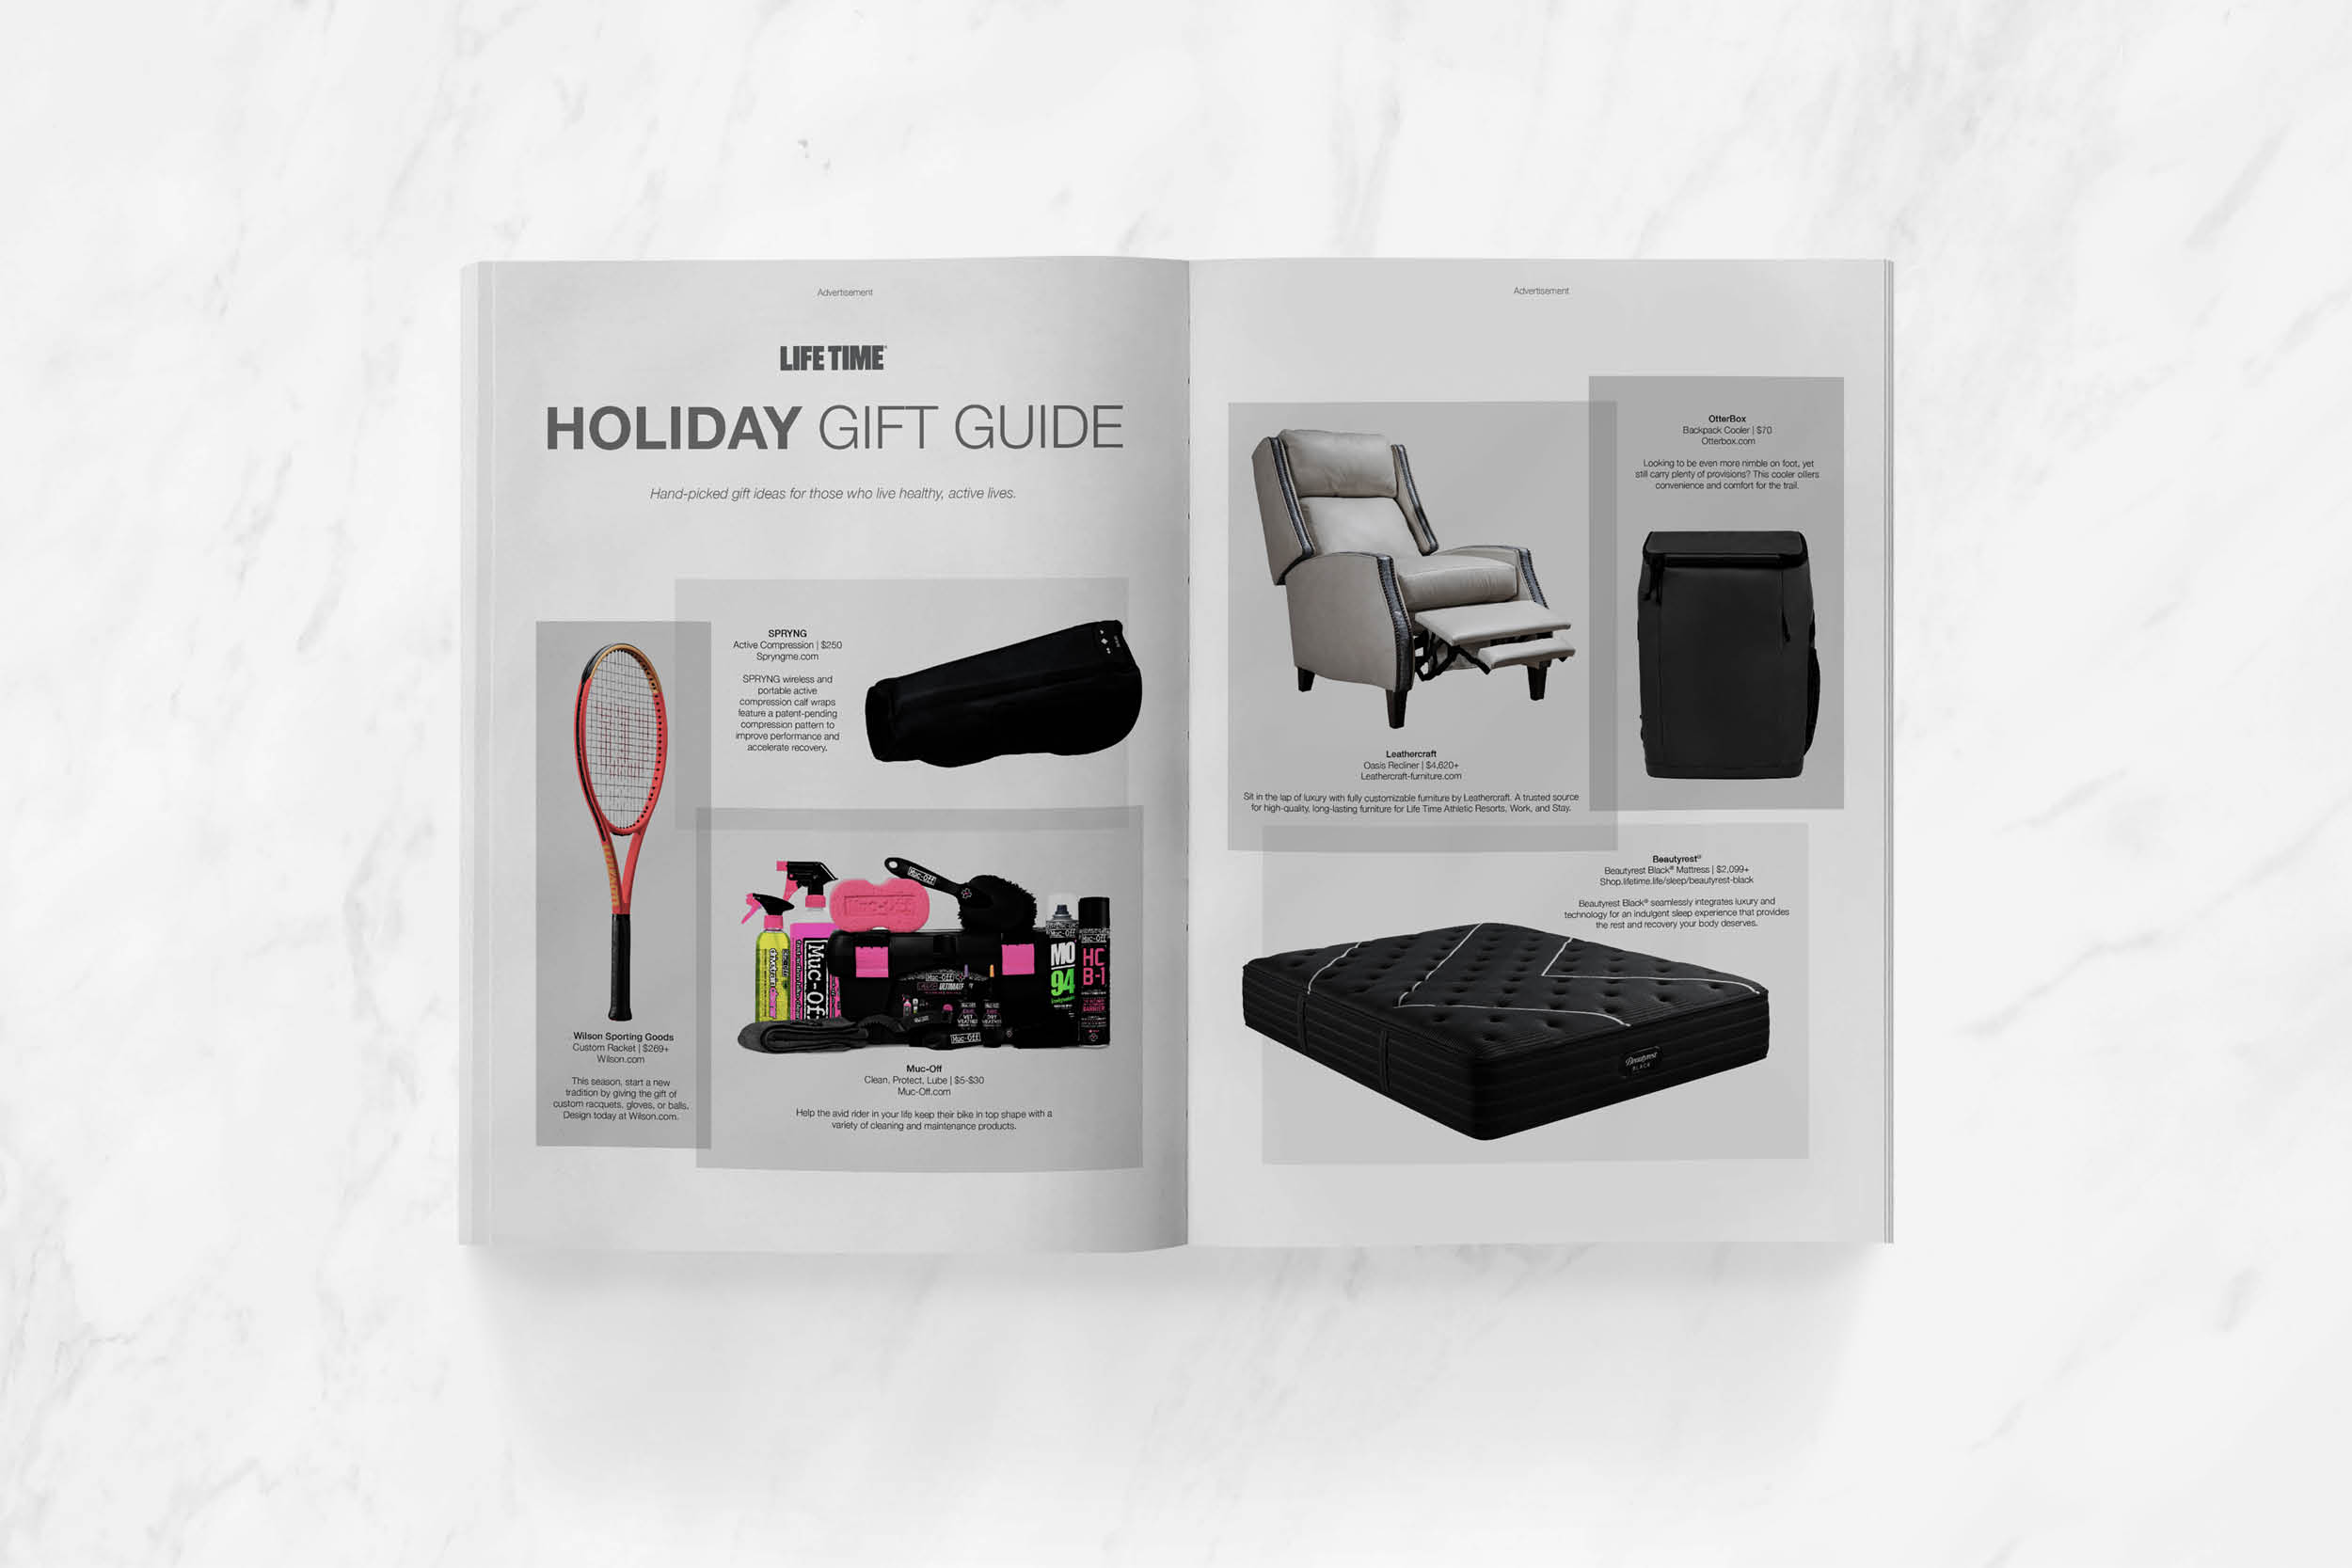 Life Time's 2021 Holiday Gift Guide